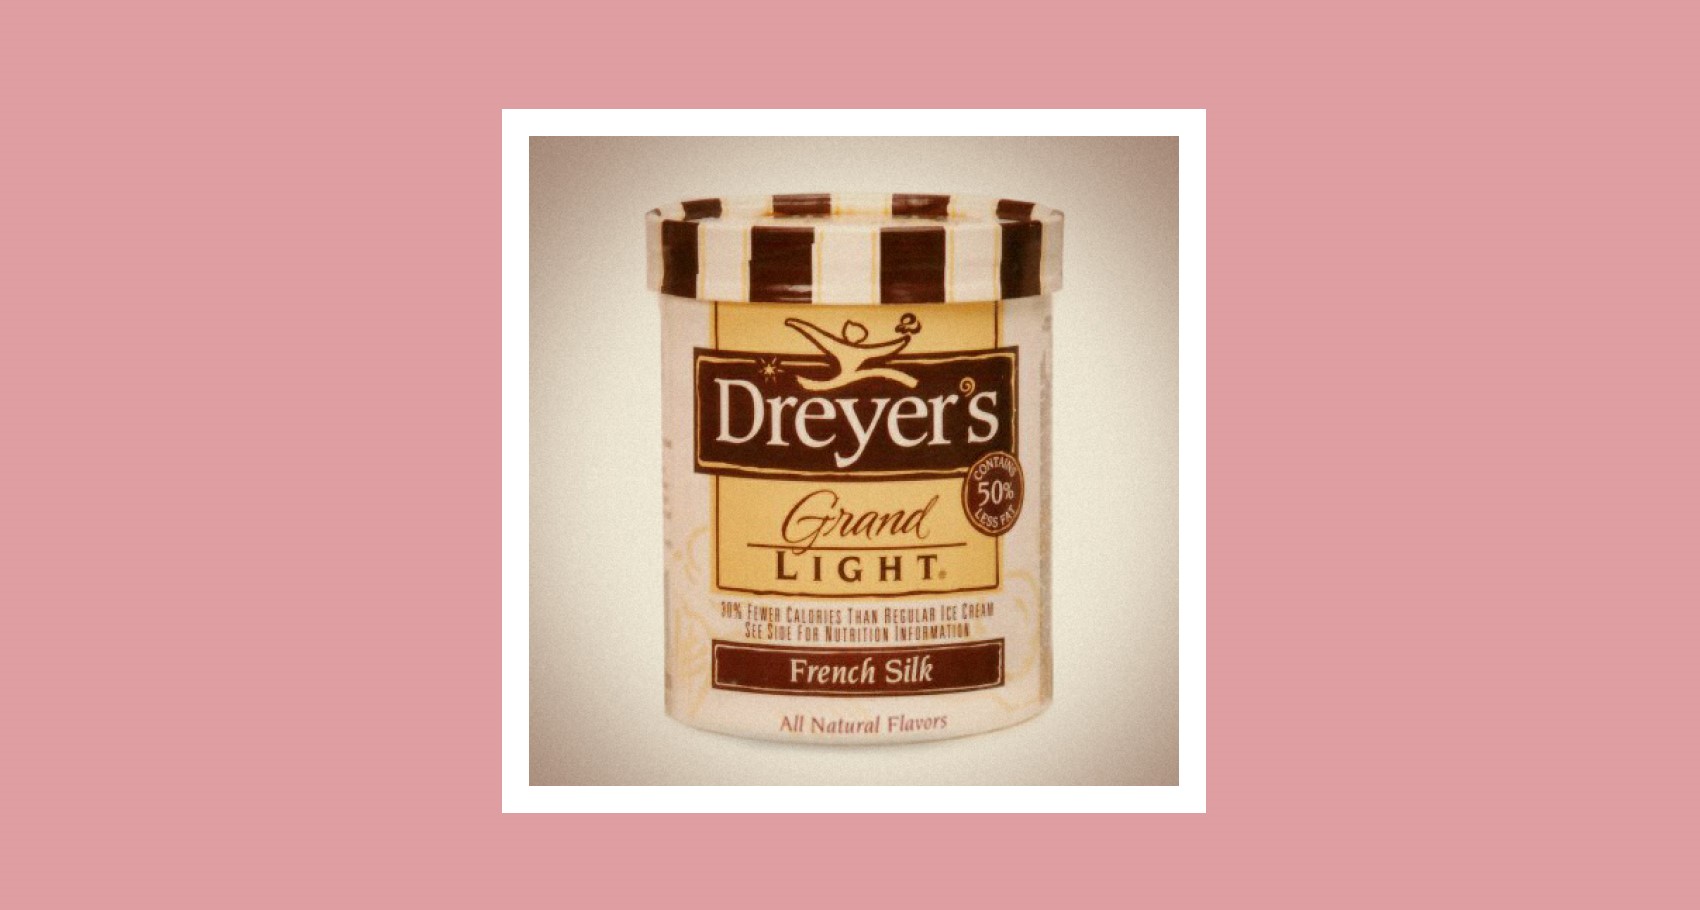 Photo of a carton of Dreyer's Light French Silk Ice cream in retail packaging from 1987.